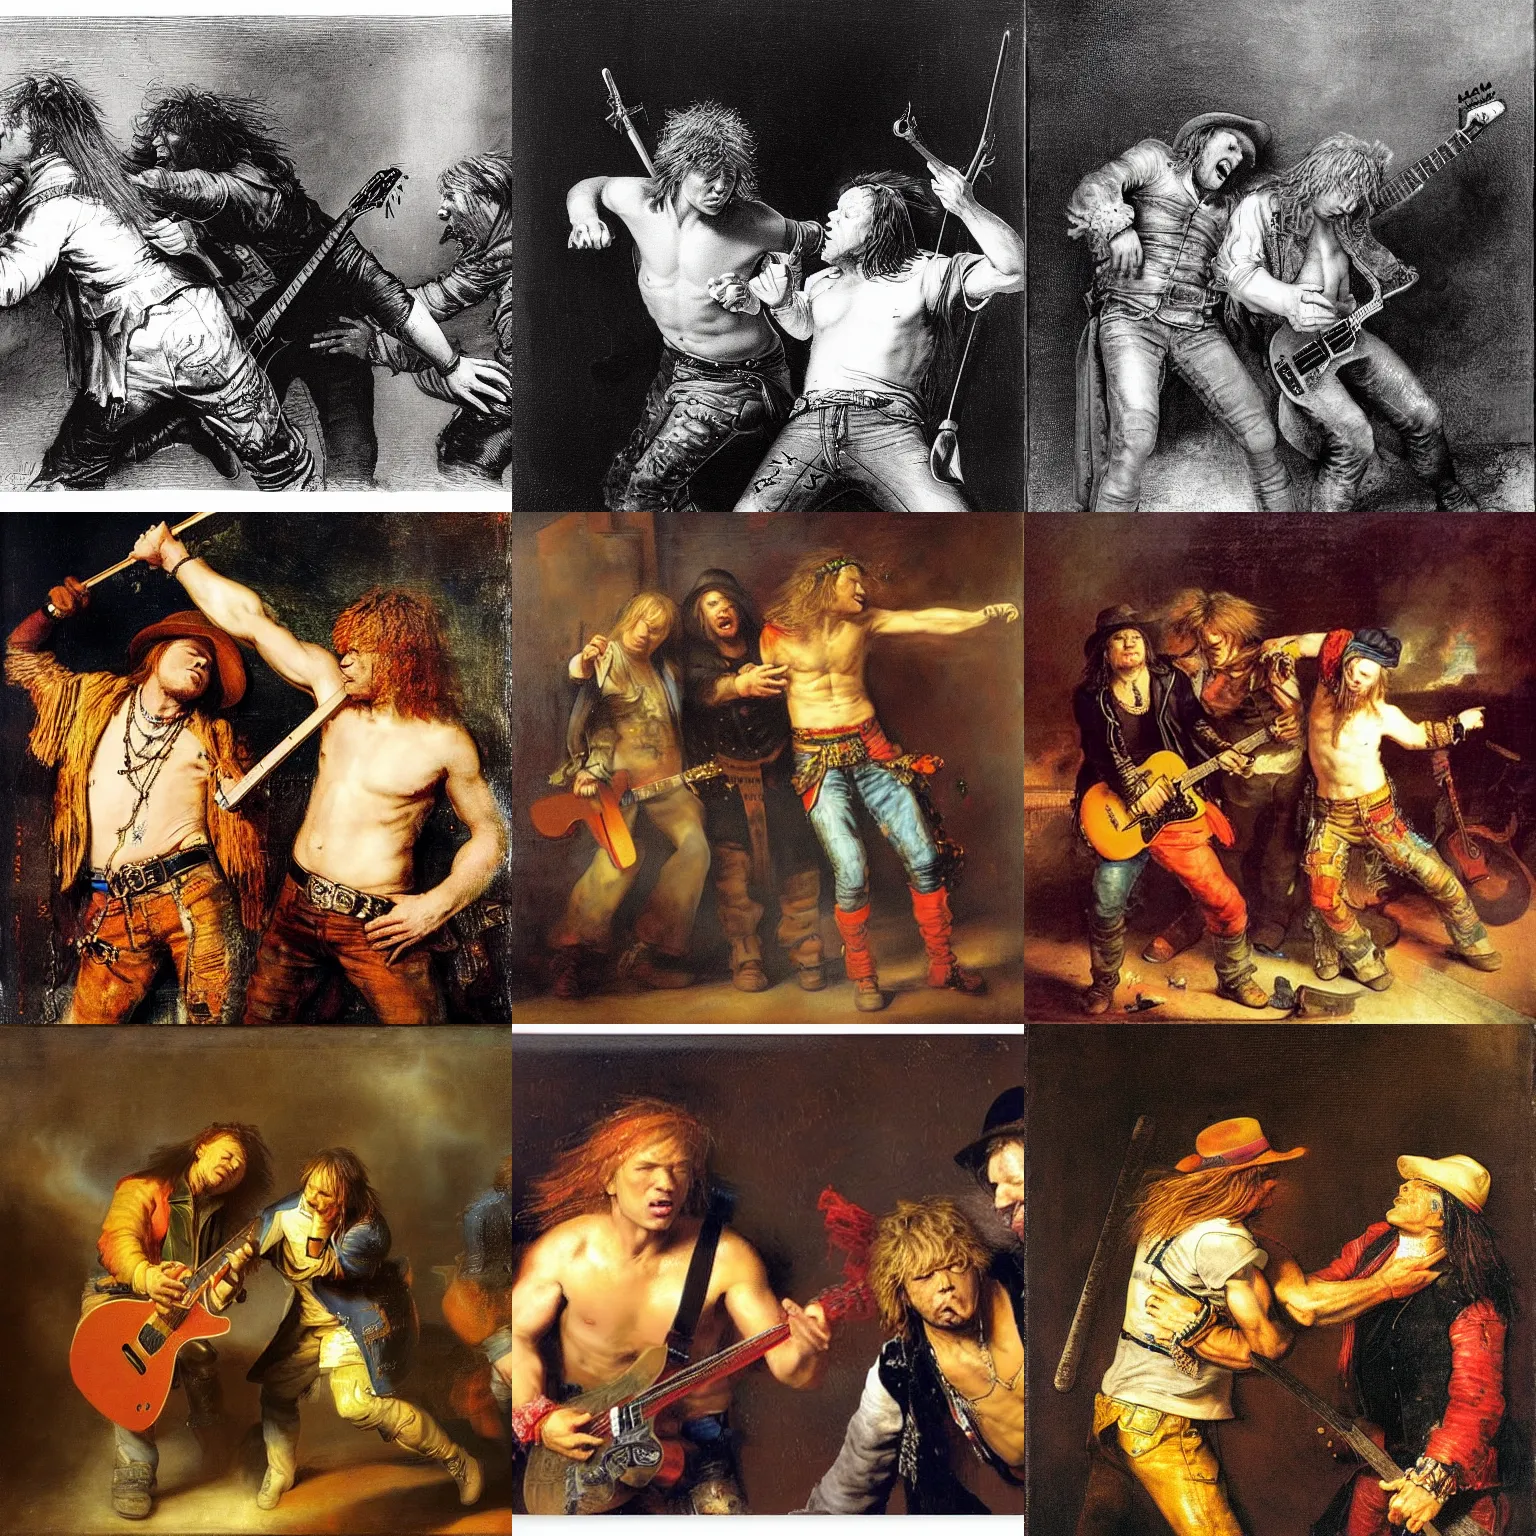 Prompt: axl rose and john bon jovi fighting violently over a broken electric guitar, by rembrandt